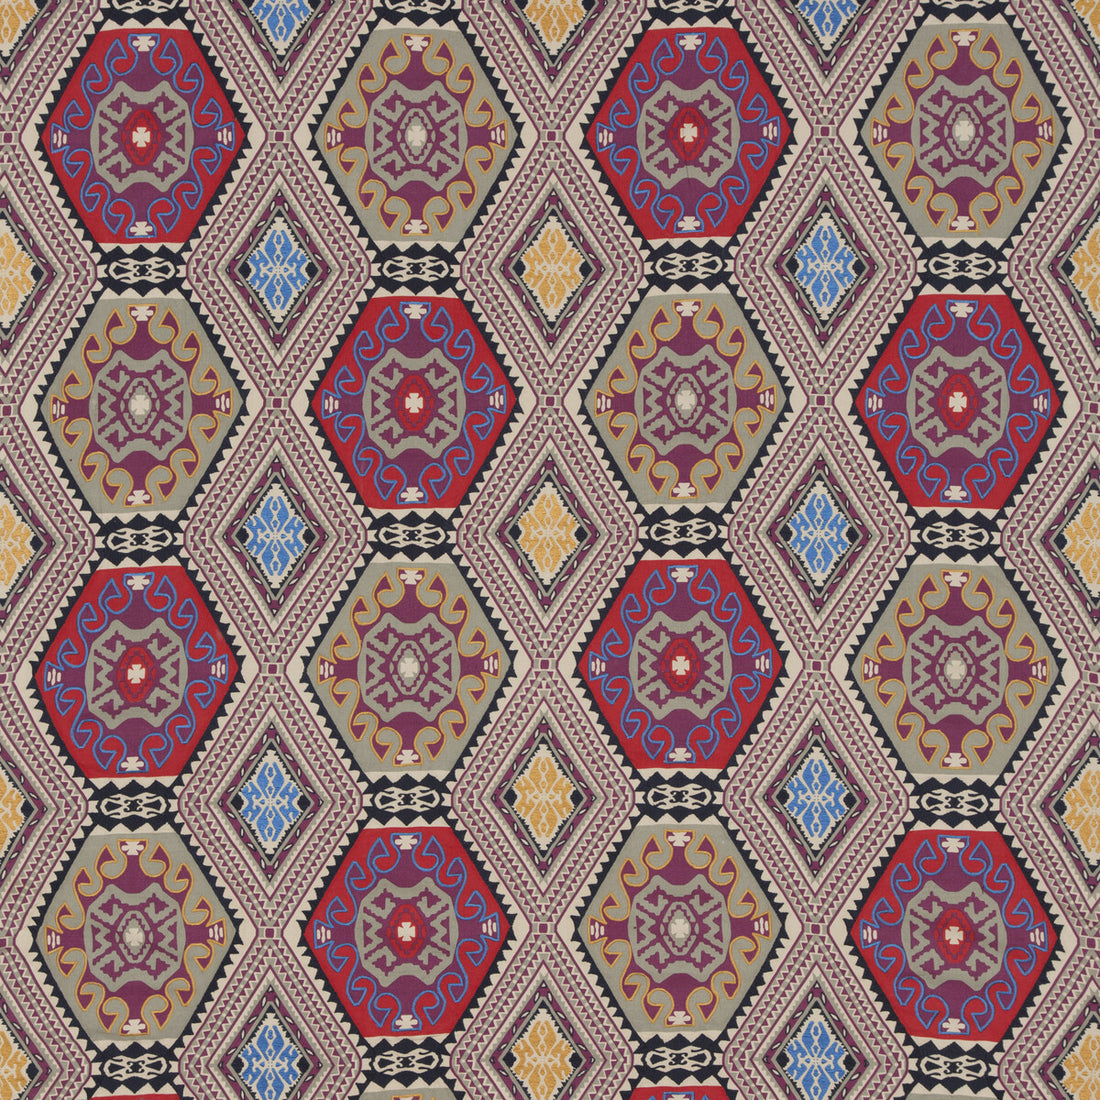 Magic Carpet fabric in plum color - pattern FD283.H113.0 - by Mulberry in the Bohemian Travels collection